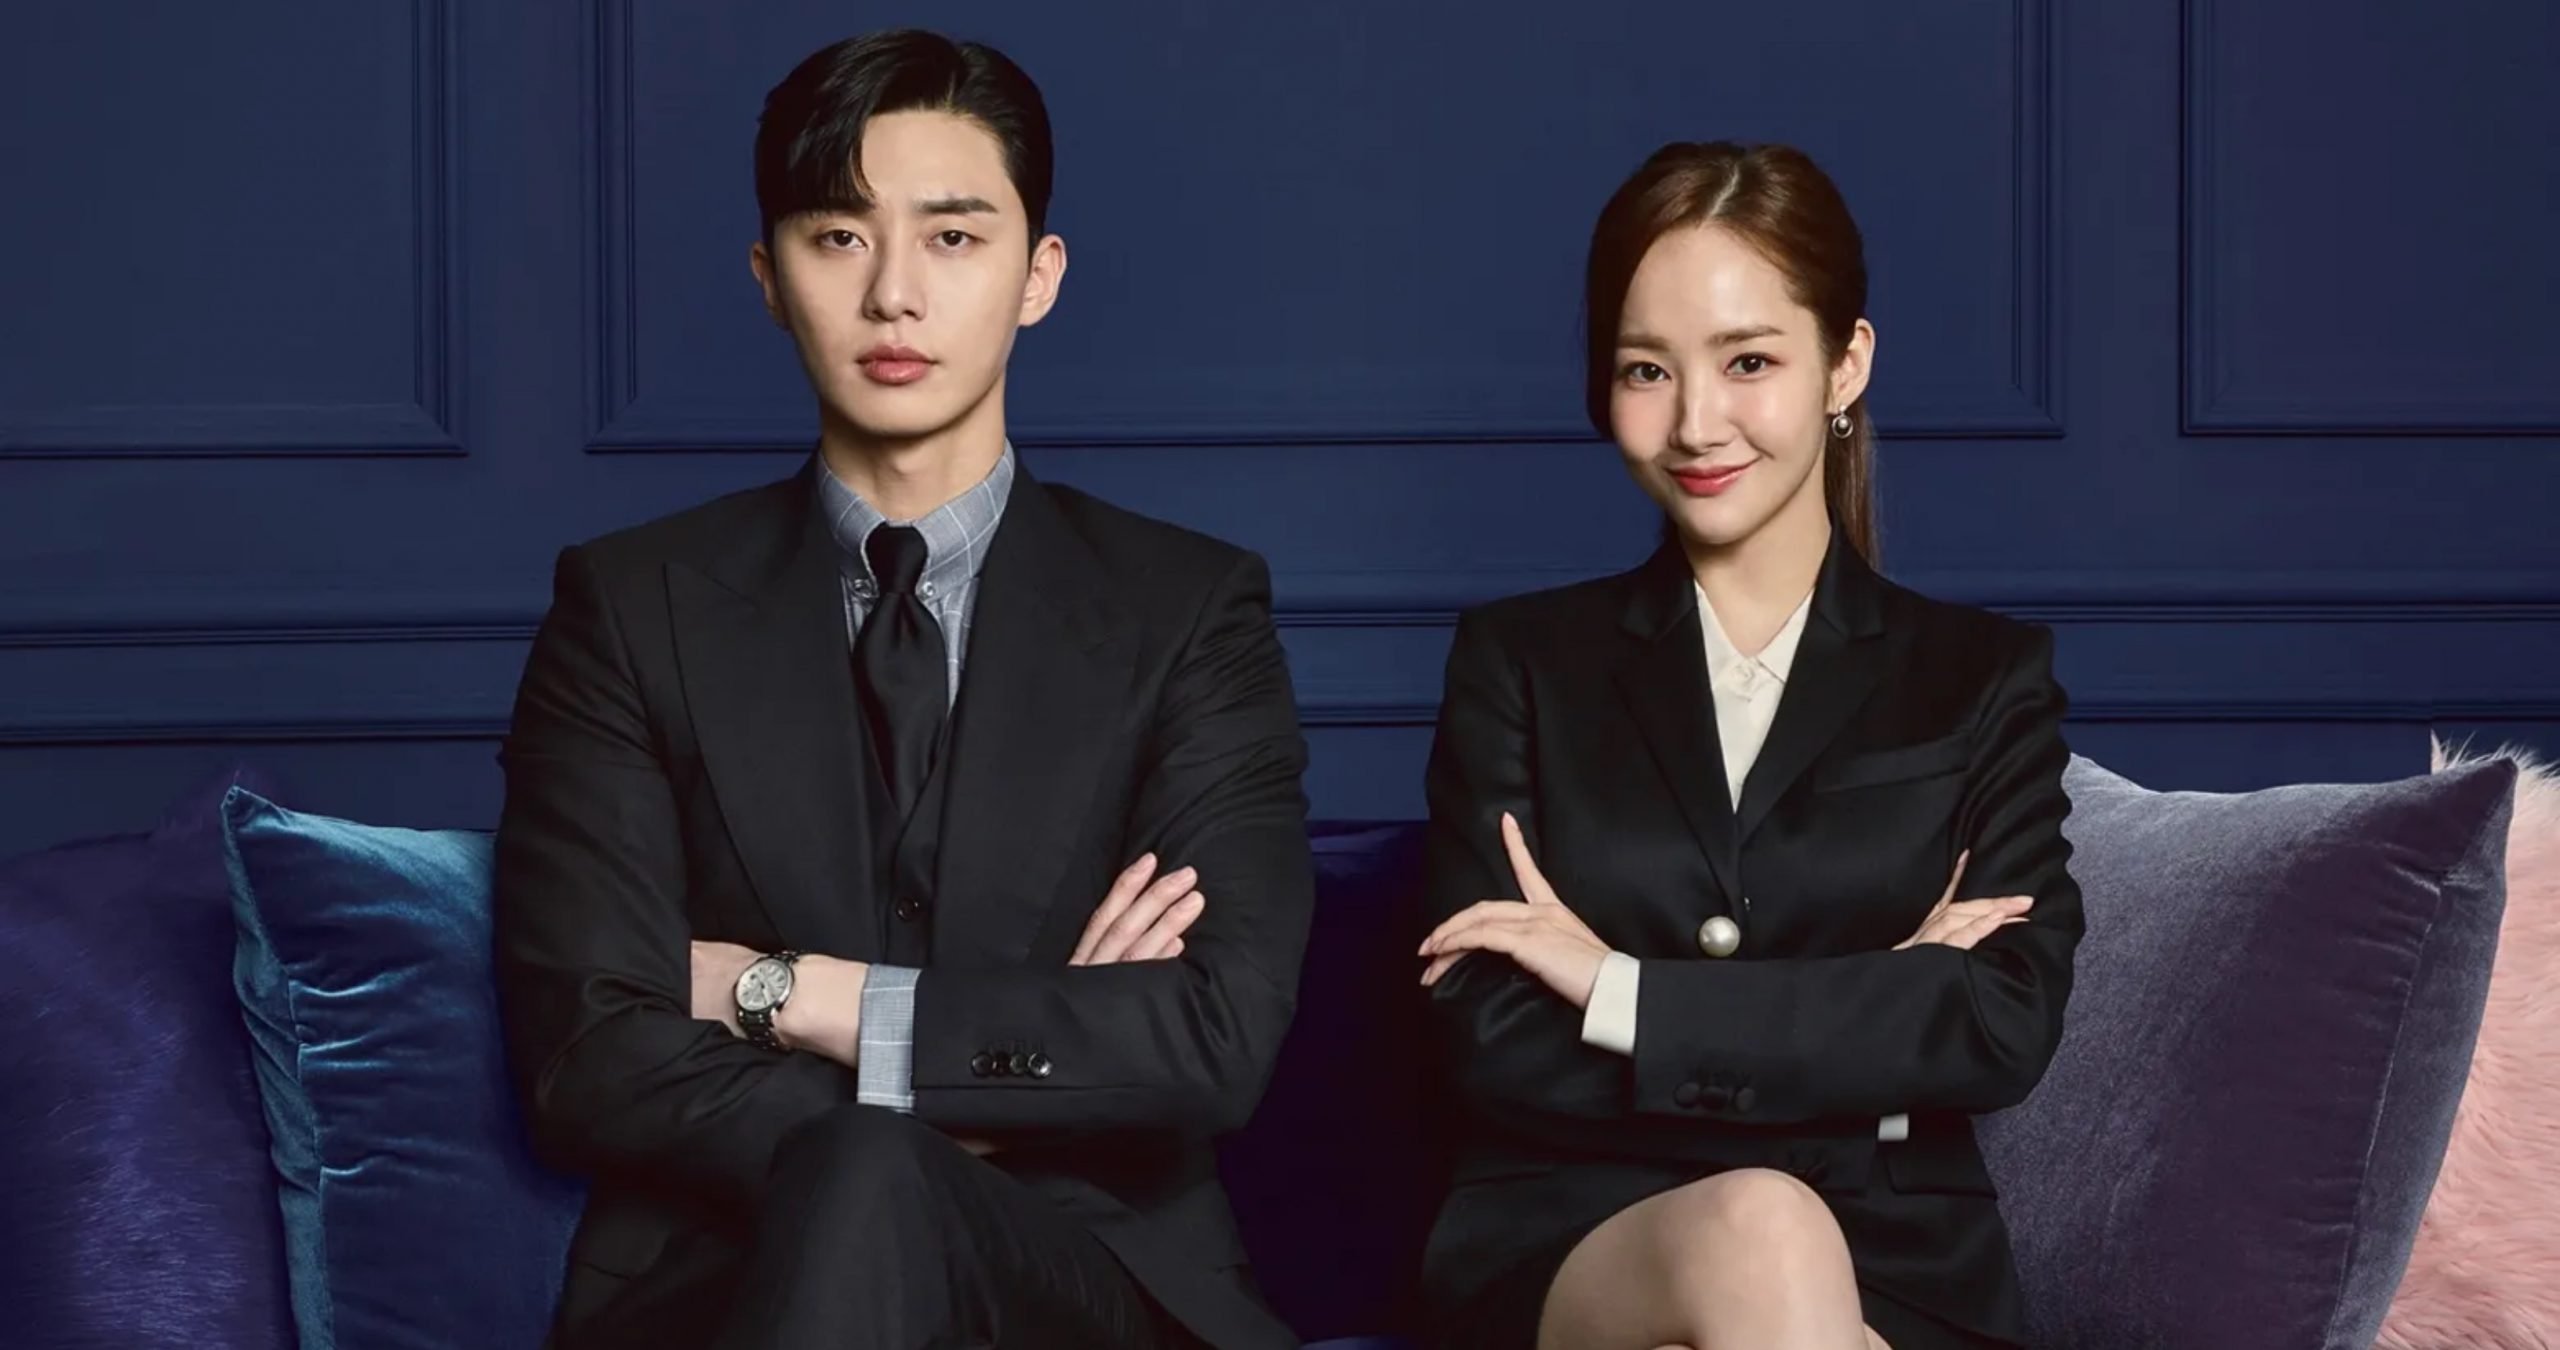 Actors Park Seo-Joon and Park Min-Young in 'What's Wrong with Secretary Kim?' K-drama sitting on couch in work attire